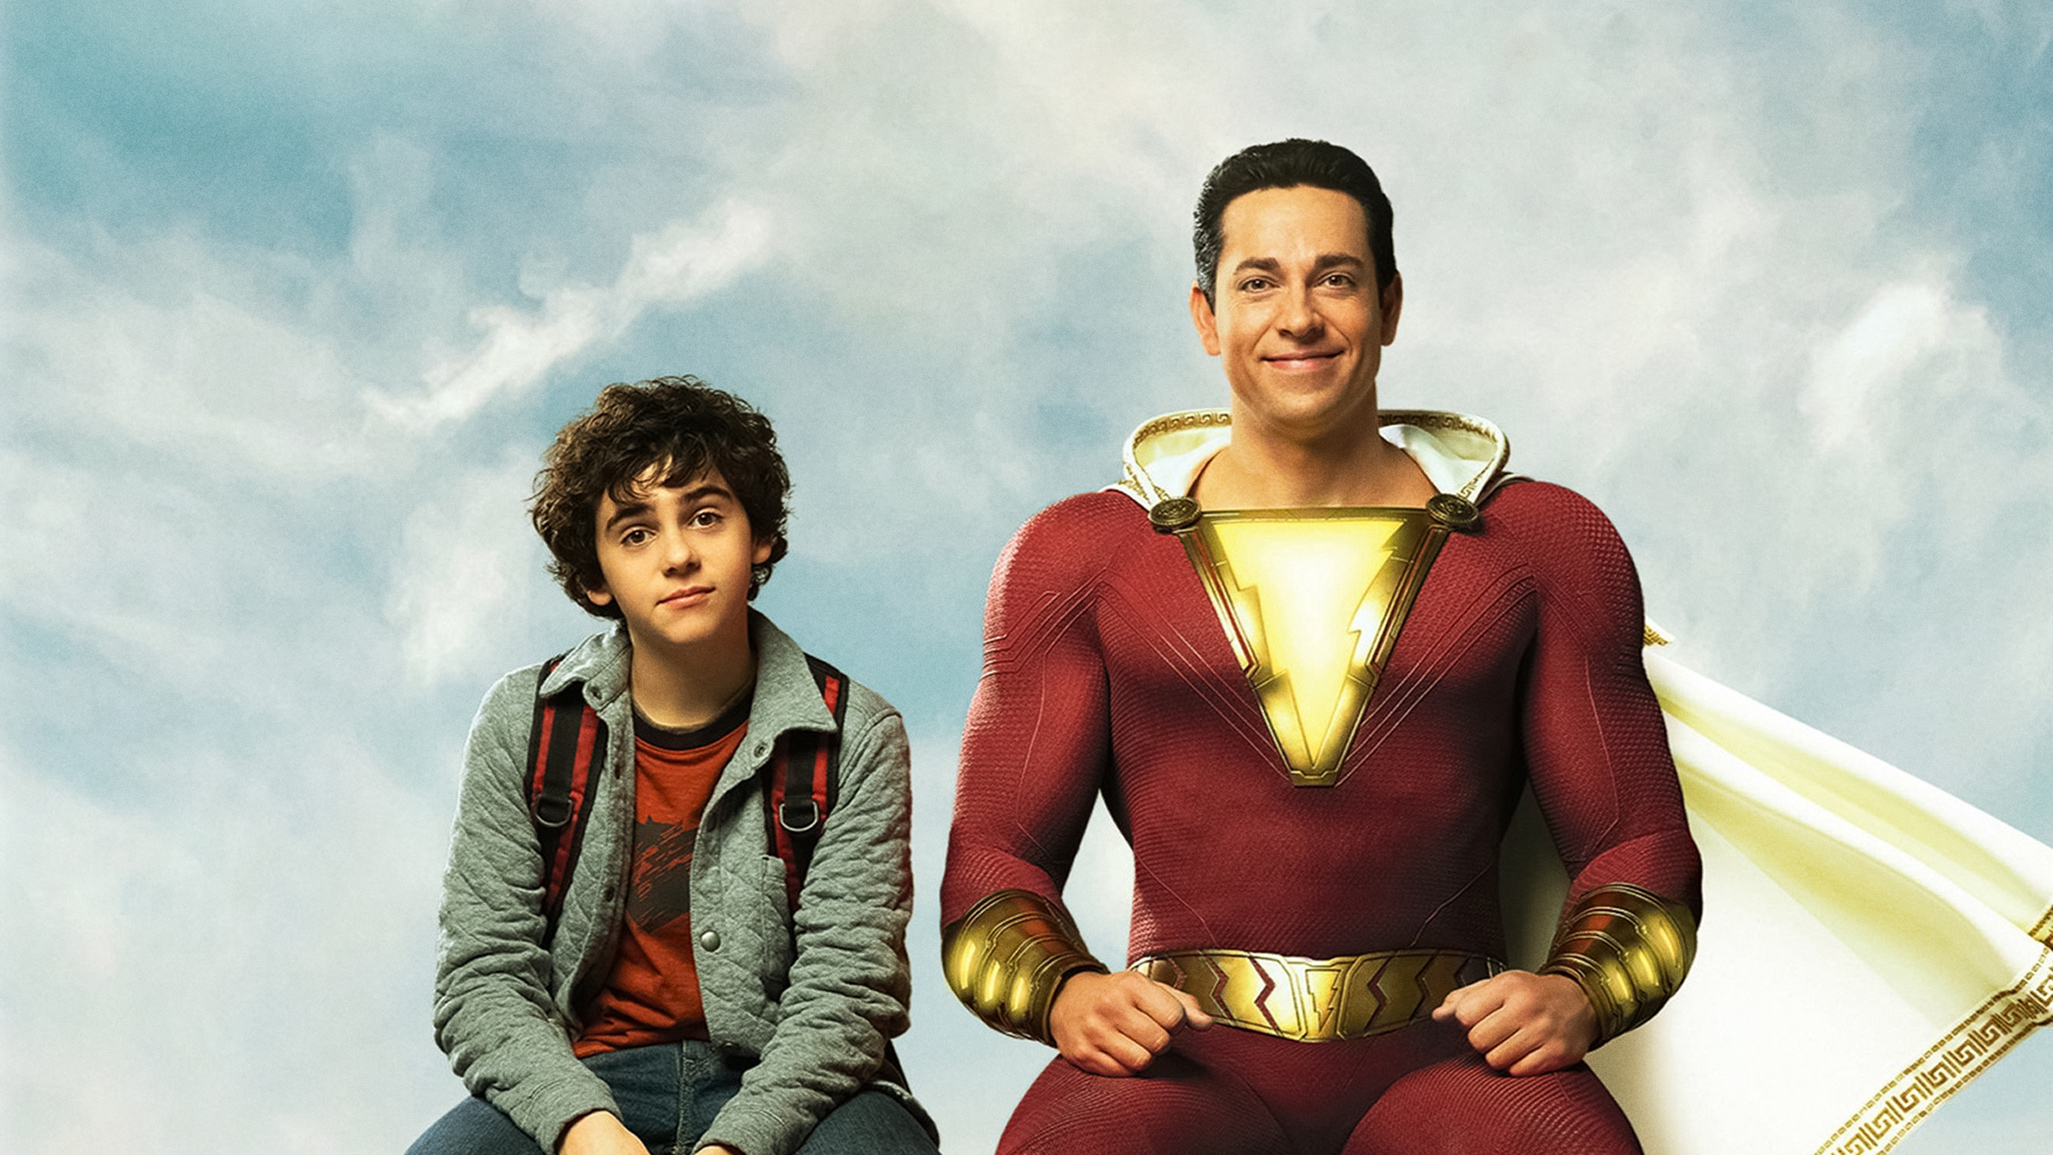 Shazam New Poster Hd, HD Movies, 4k Wallpapers, Images, Backgrounds